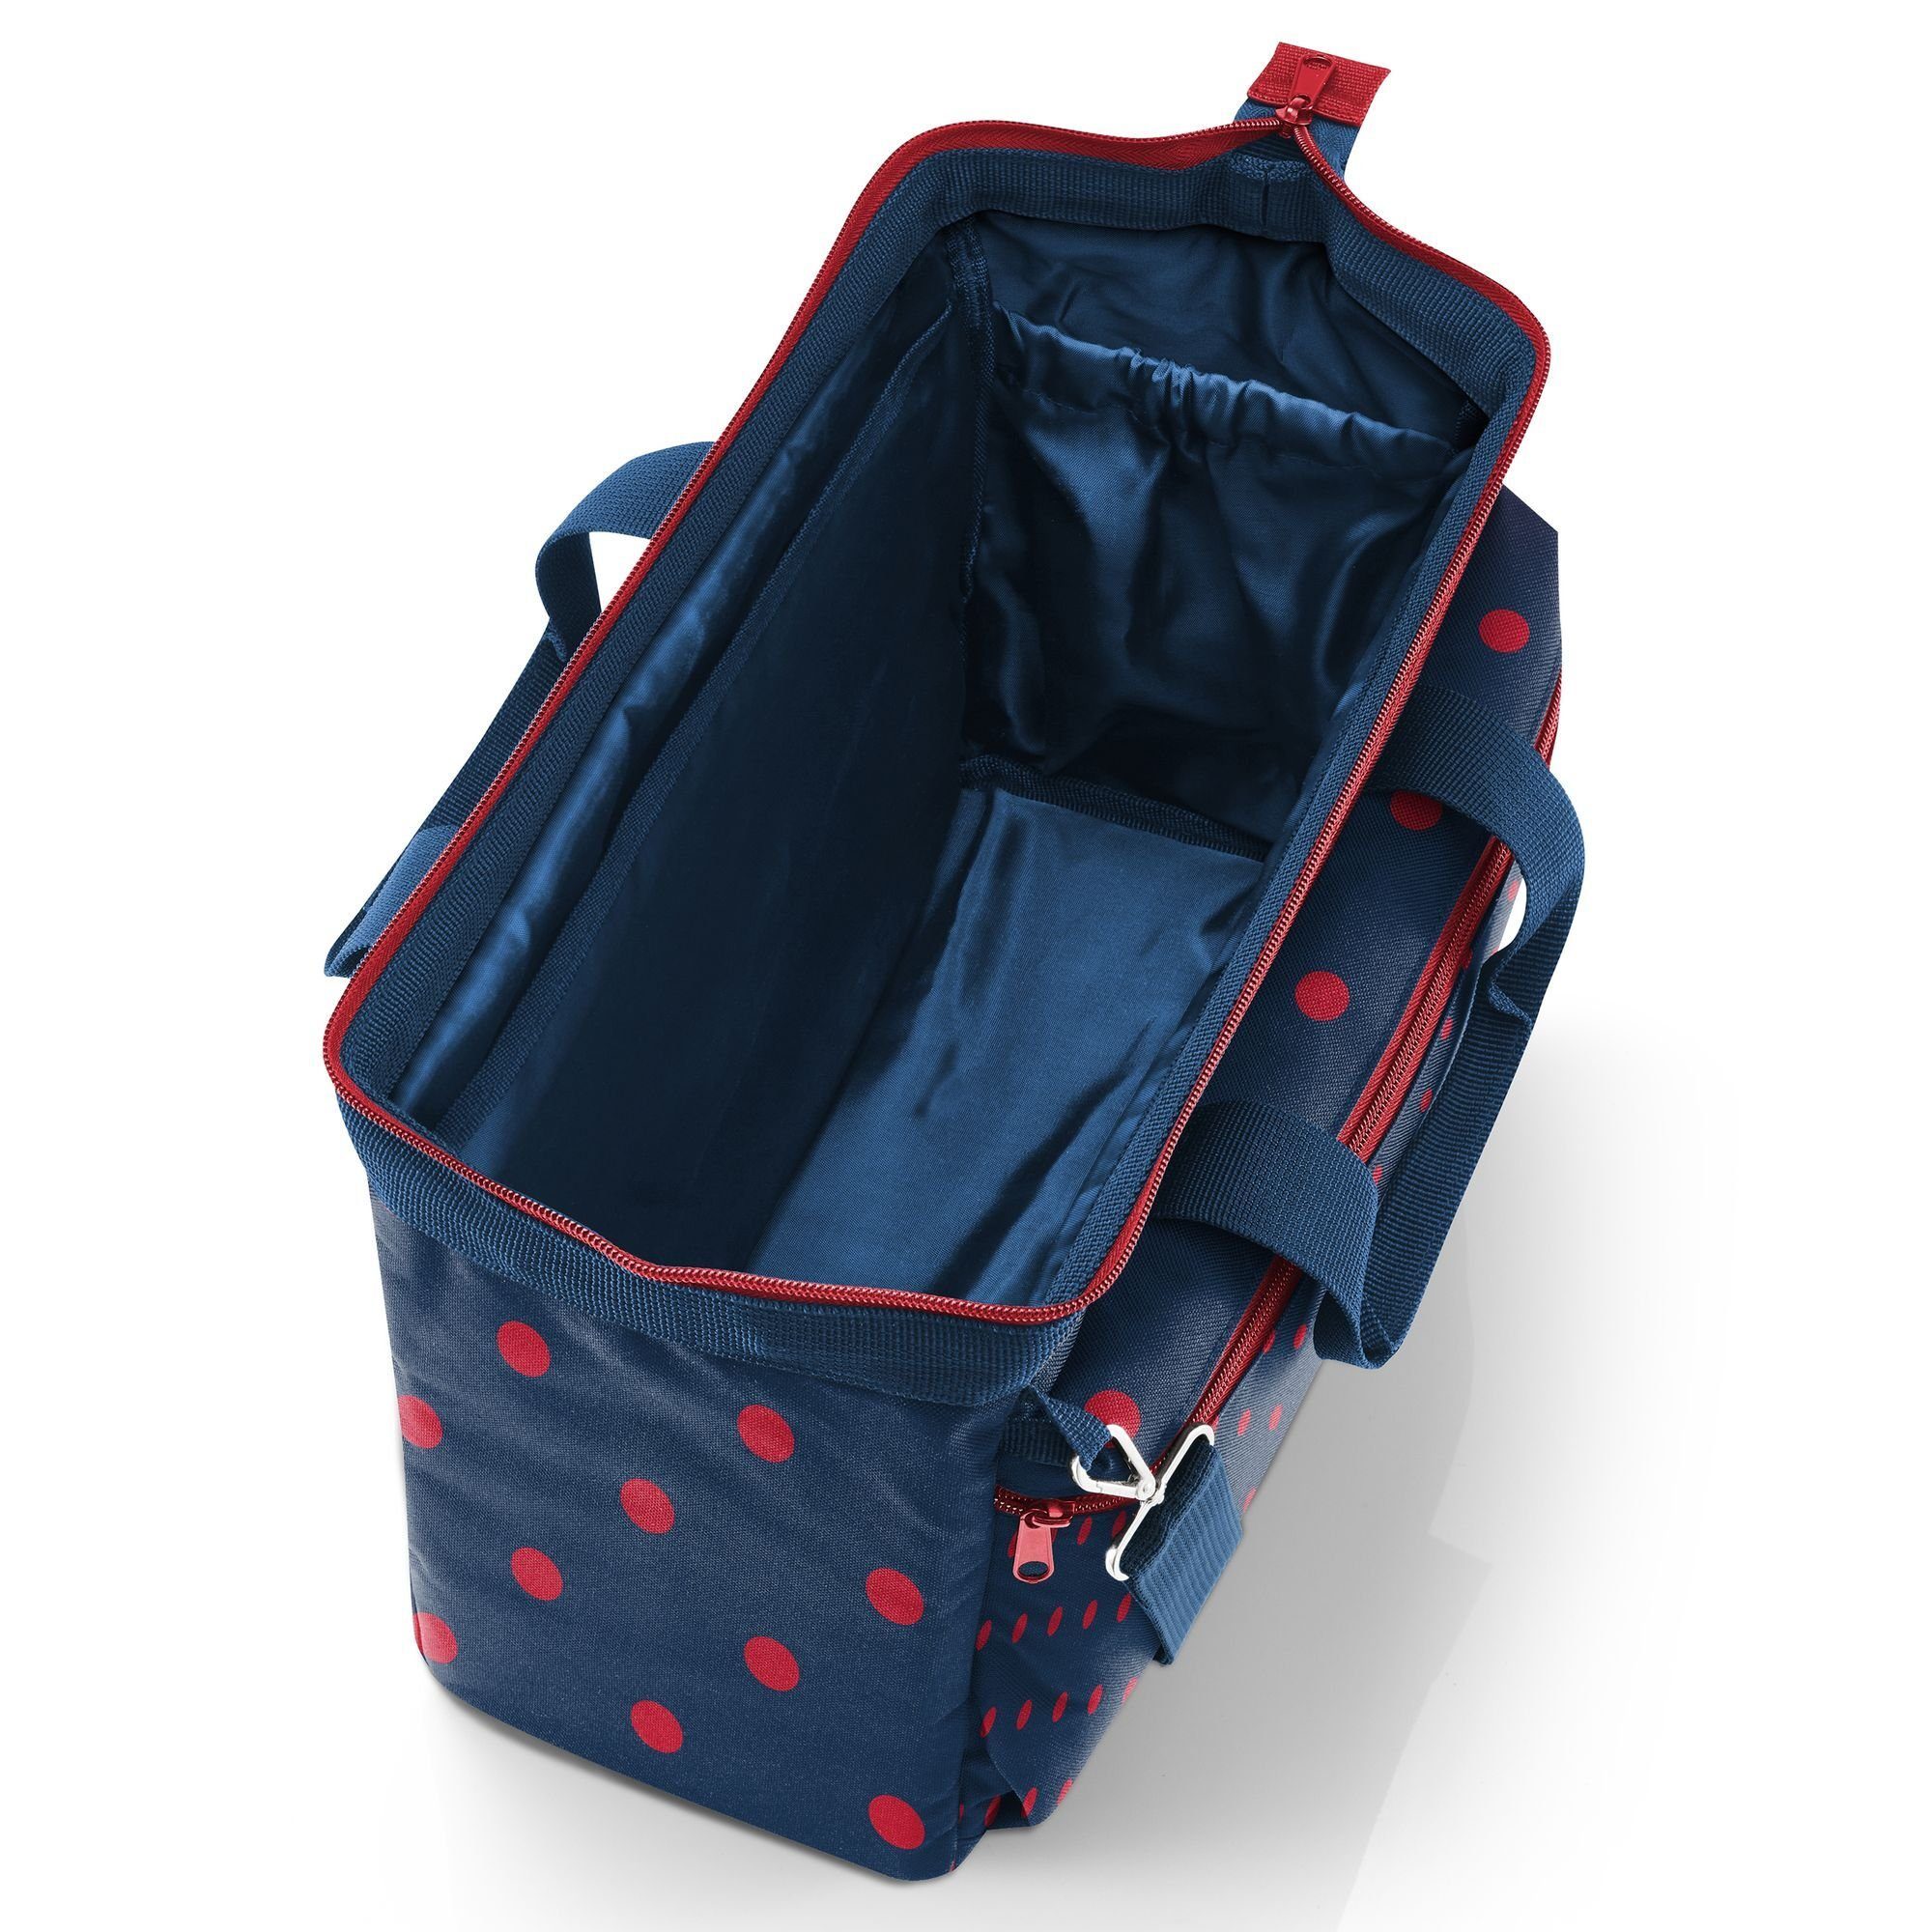 red dots REISENTHEL® Weekender mixed Travelling, Polyester